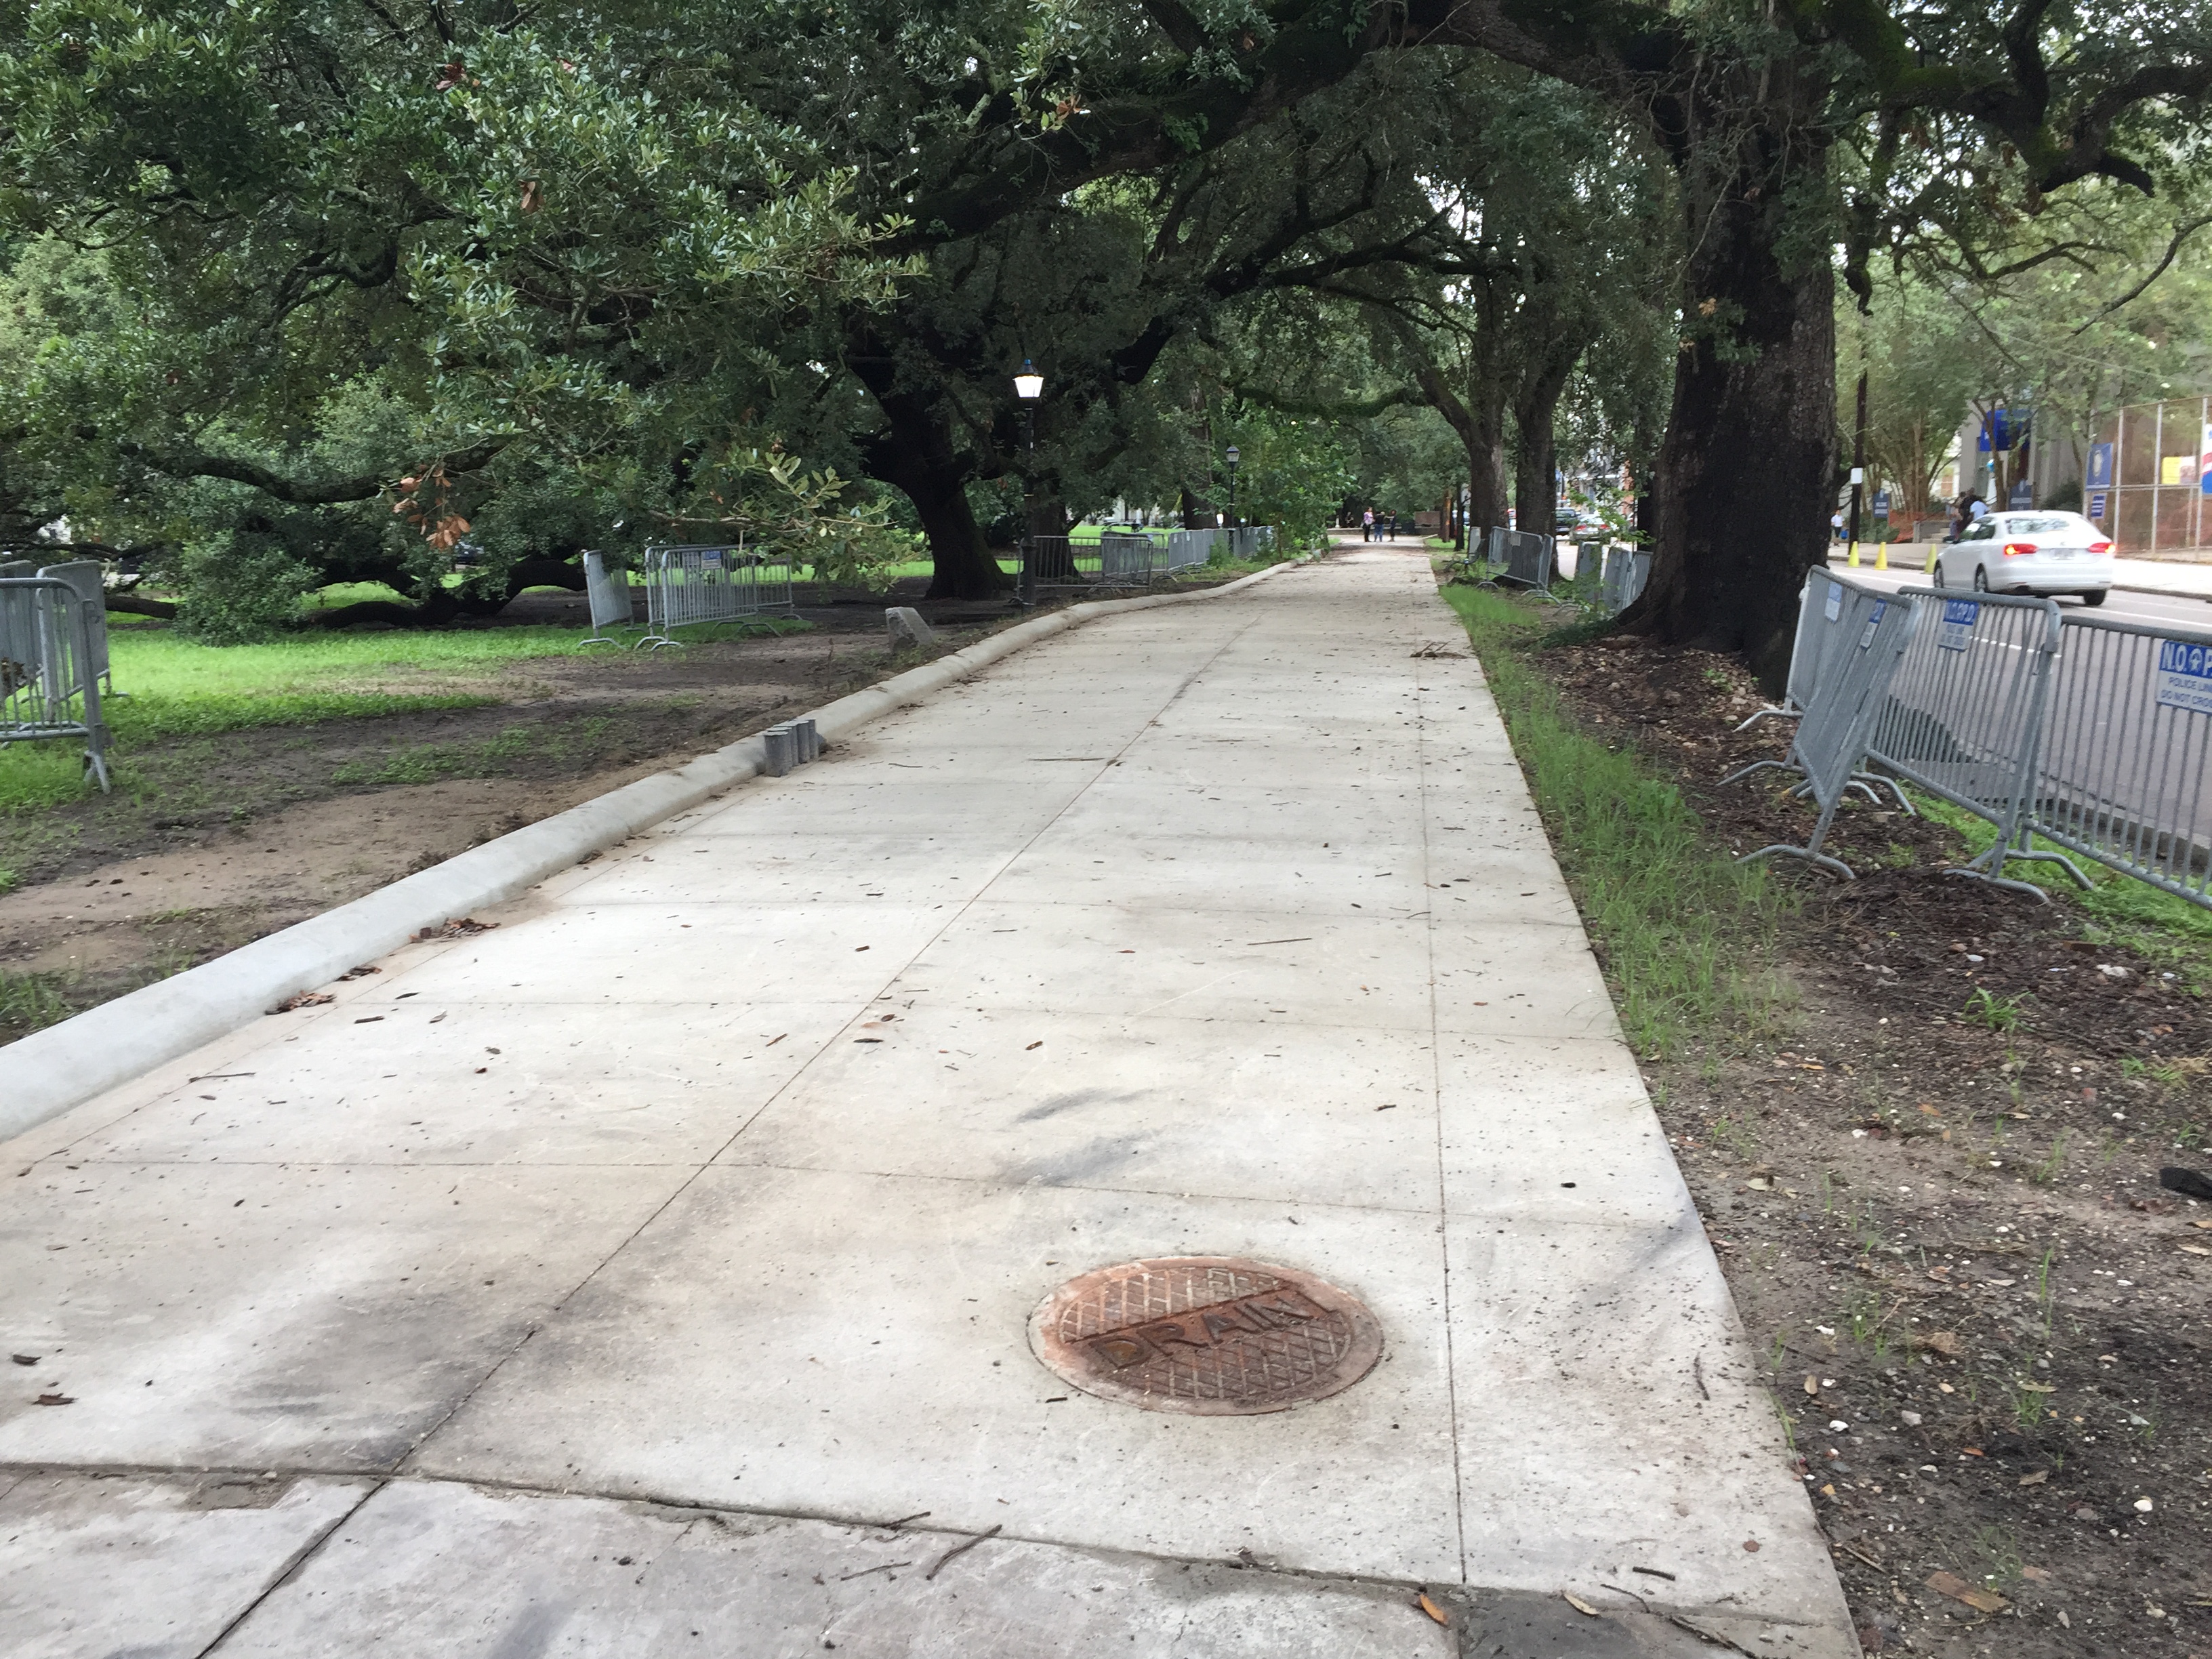 SAFE ROUTES TO SCHOOL PROJECT NEAR INTERNATIONAL SCHOOL OF LOUISIANA SUBSTANTIALLY COMPLETE